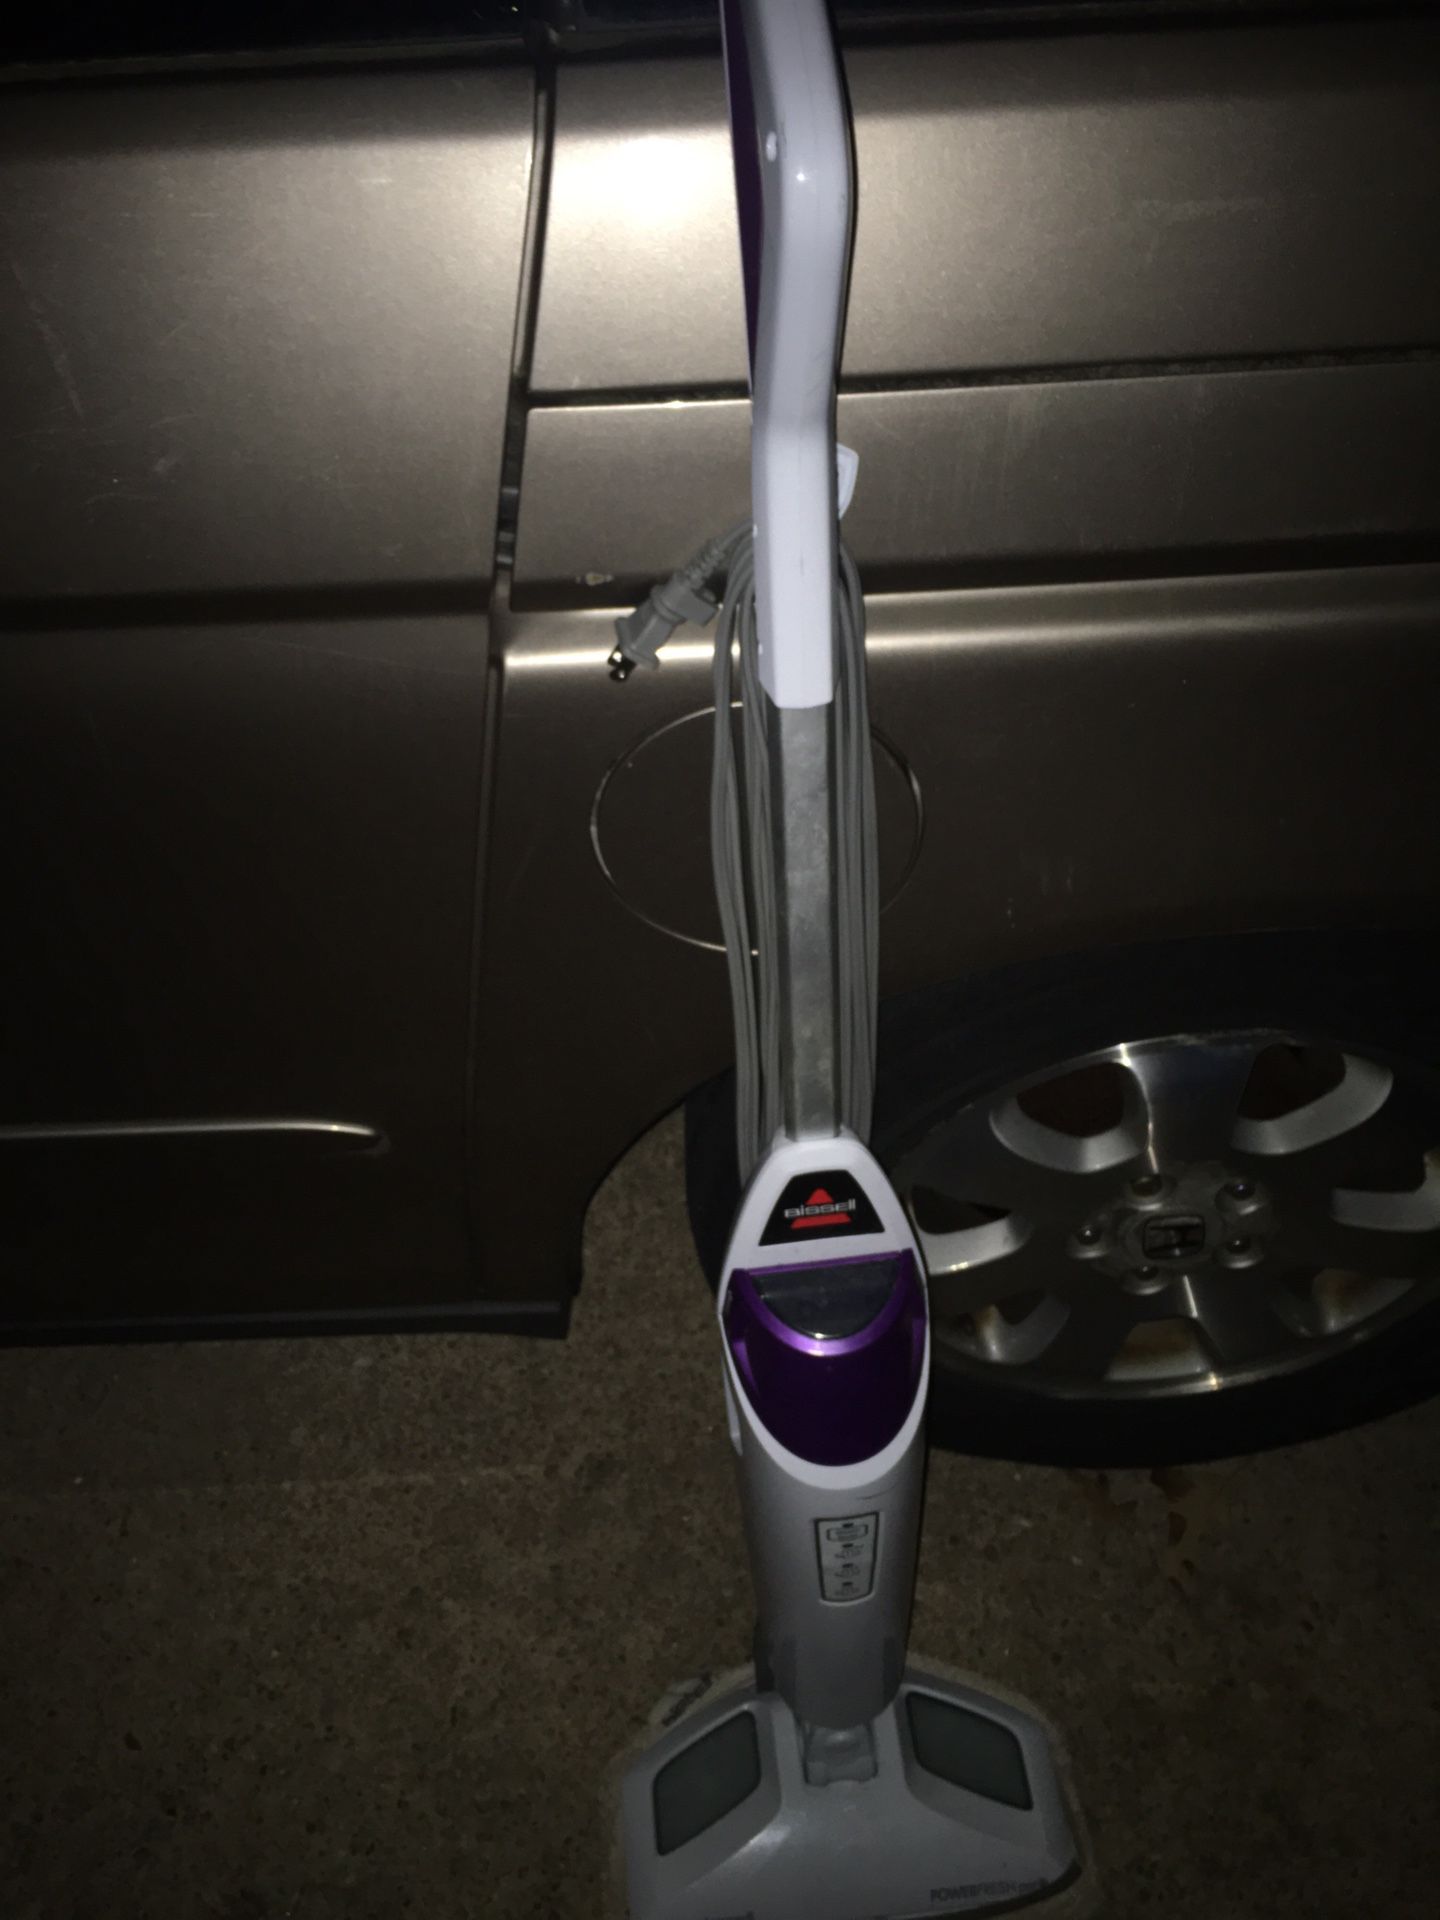 Bissell floor steam mop cleaner only $35